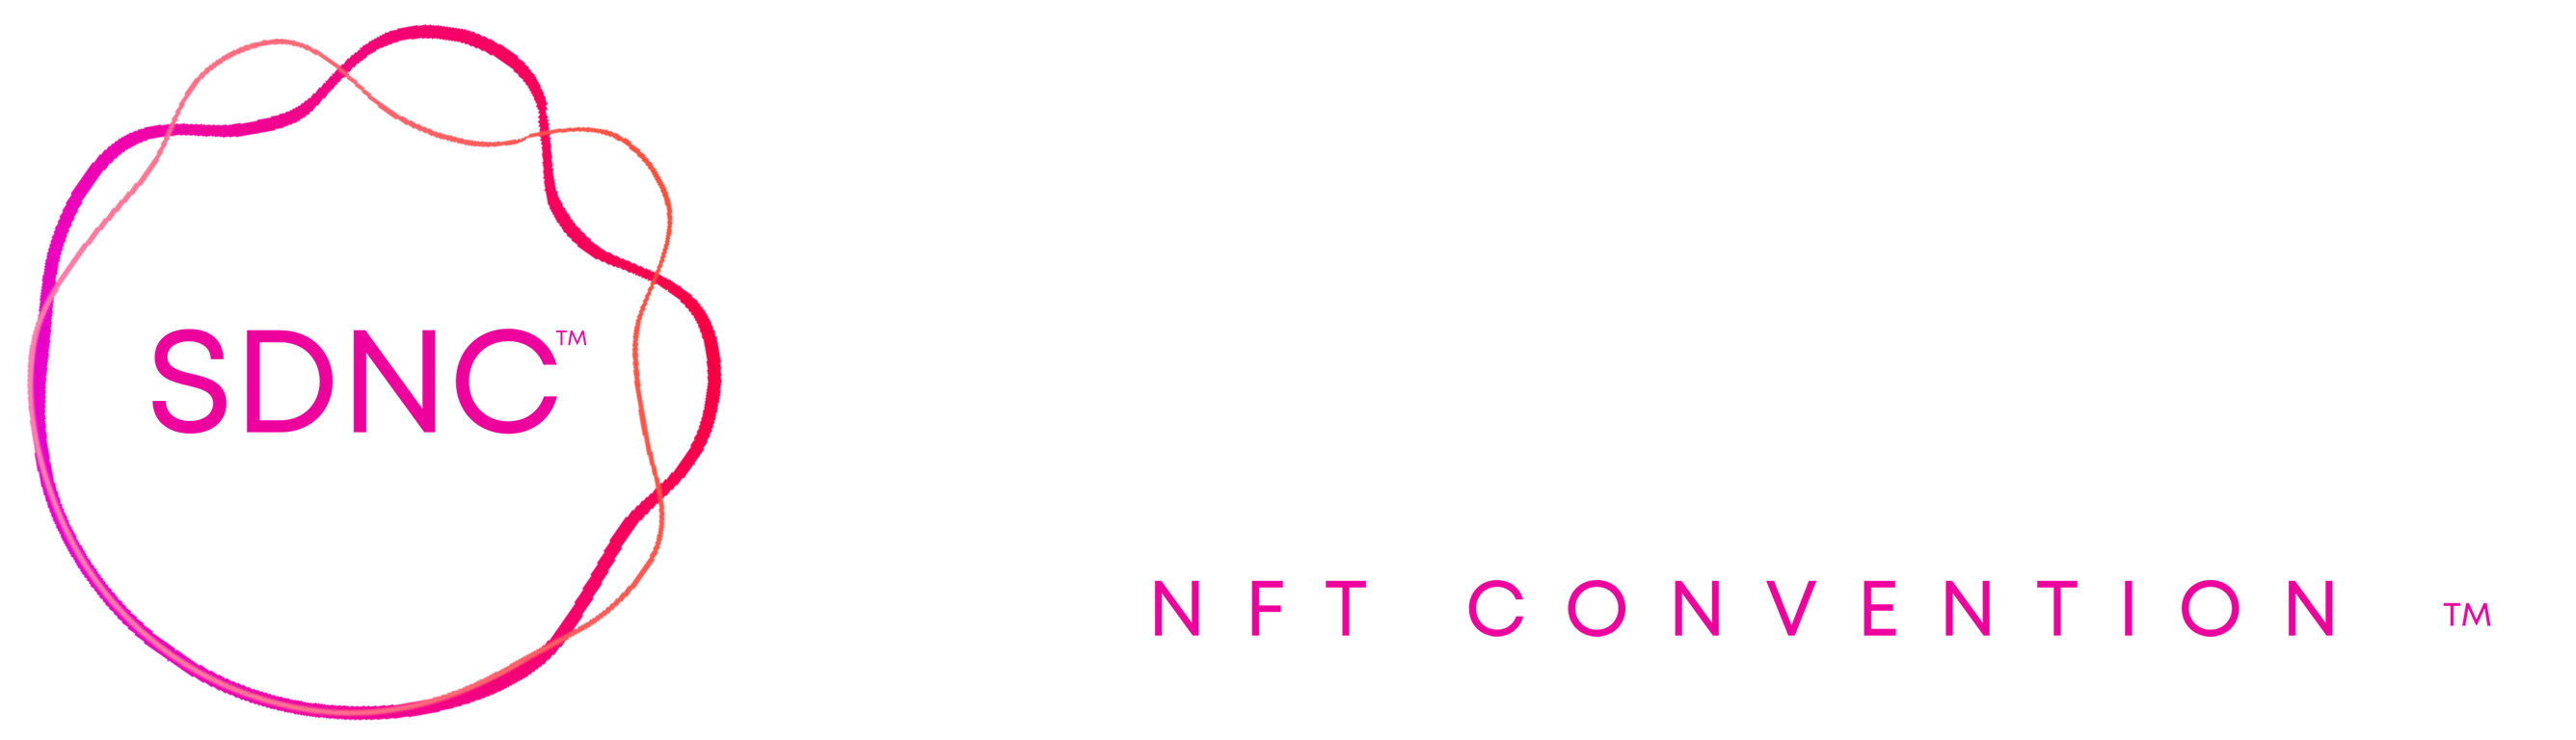 San Diego NFT Convention Promo Code, Discount Tickets, Web3, Downtown, Gaslamp, Invest, Investment